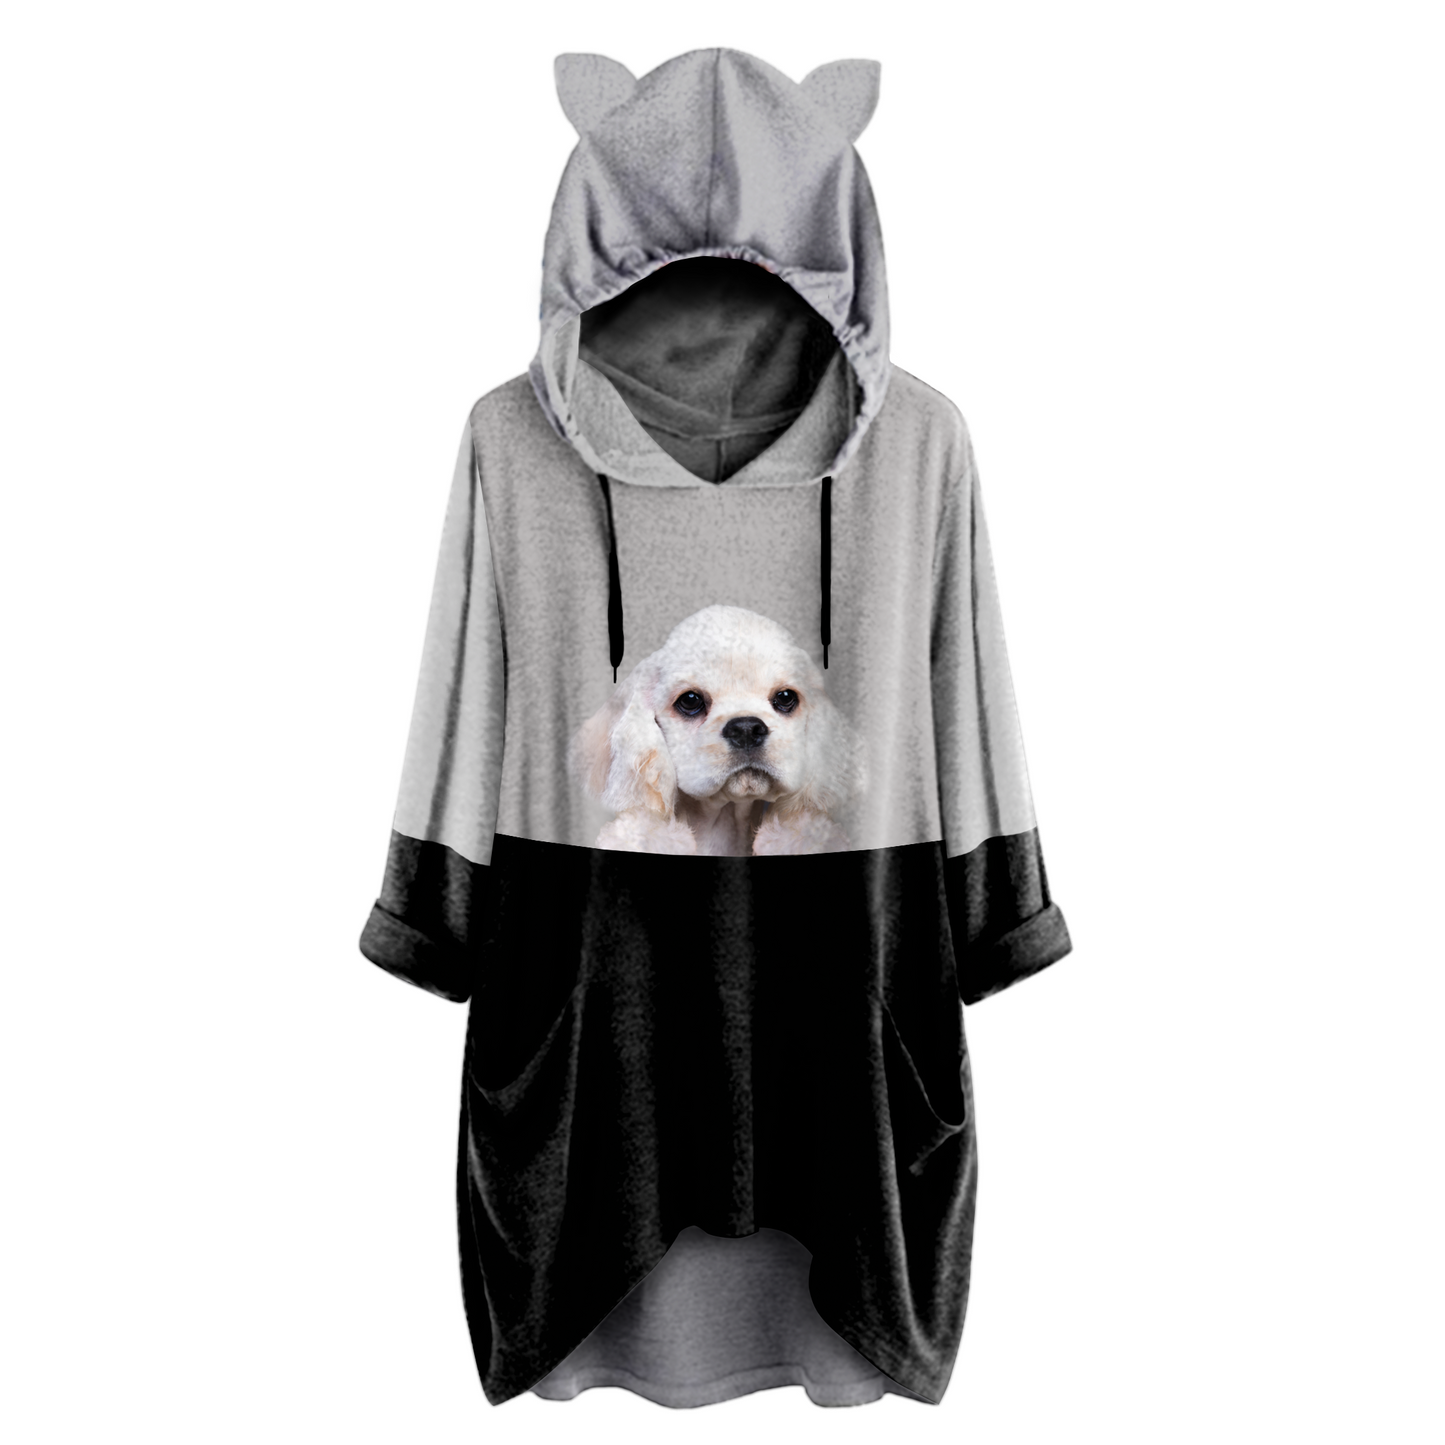 Can You See Me Now - American Cocker Spaniel Hoodie With Ears V2